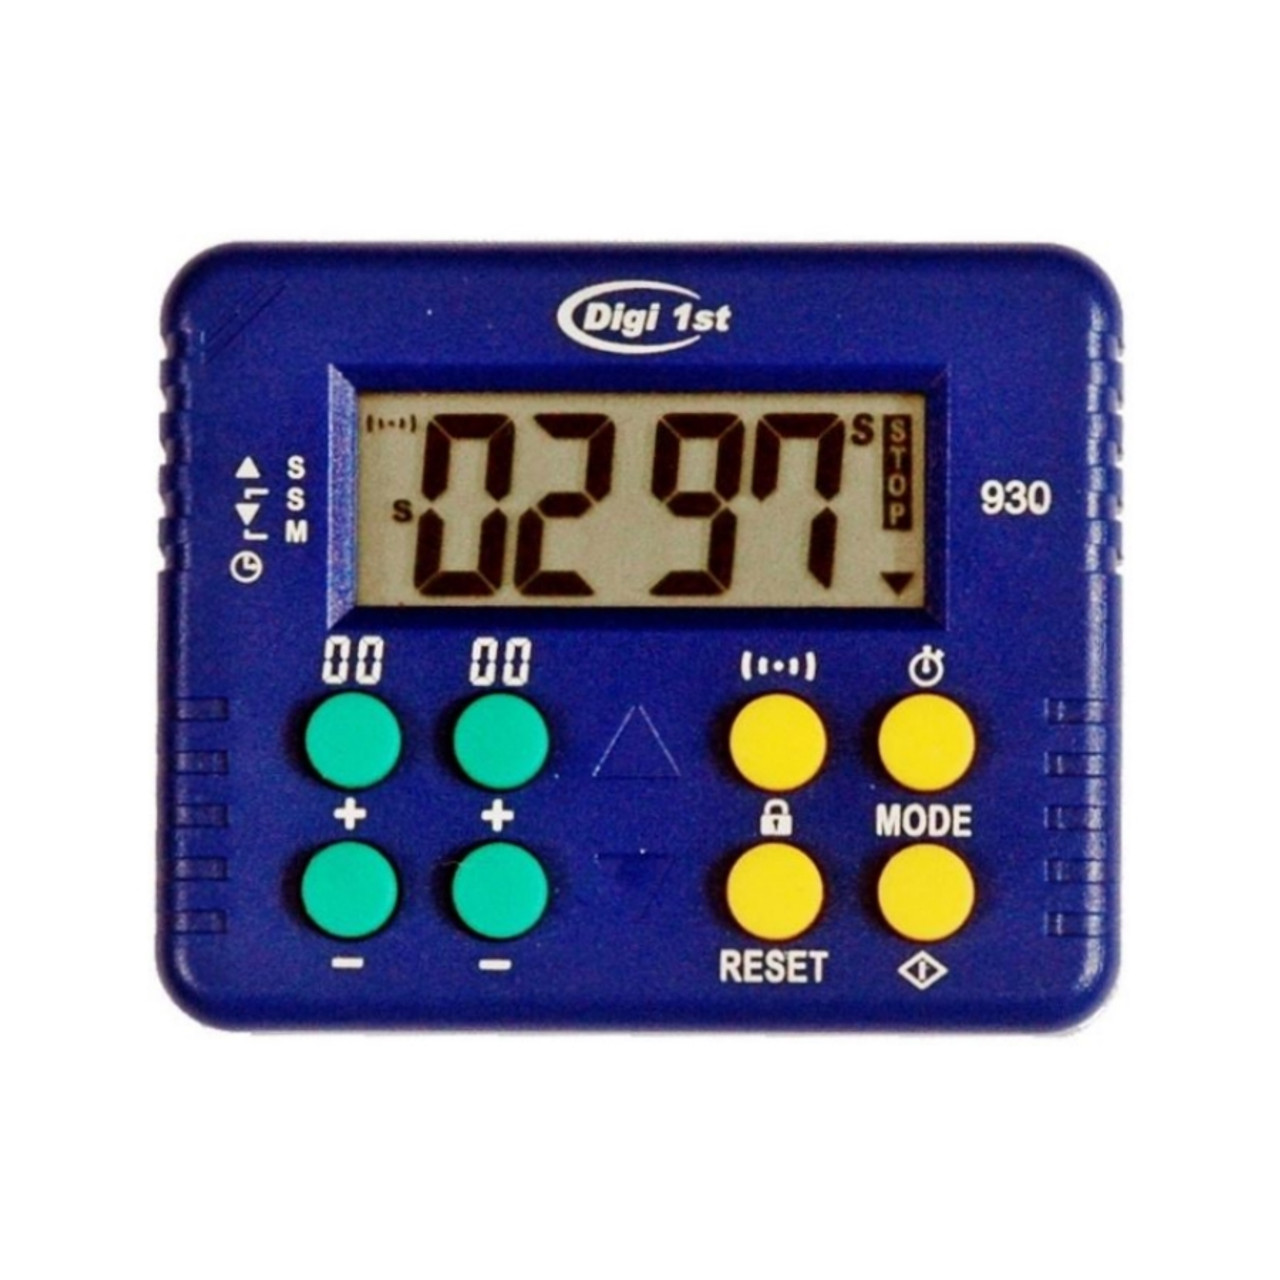 Fisherbrand Digital Timer Counts down from 99 minutes to 59 seconds in